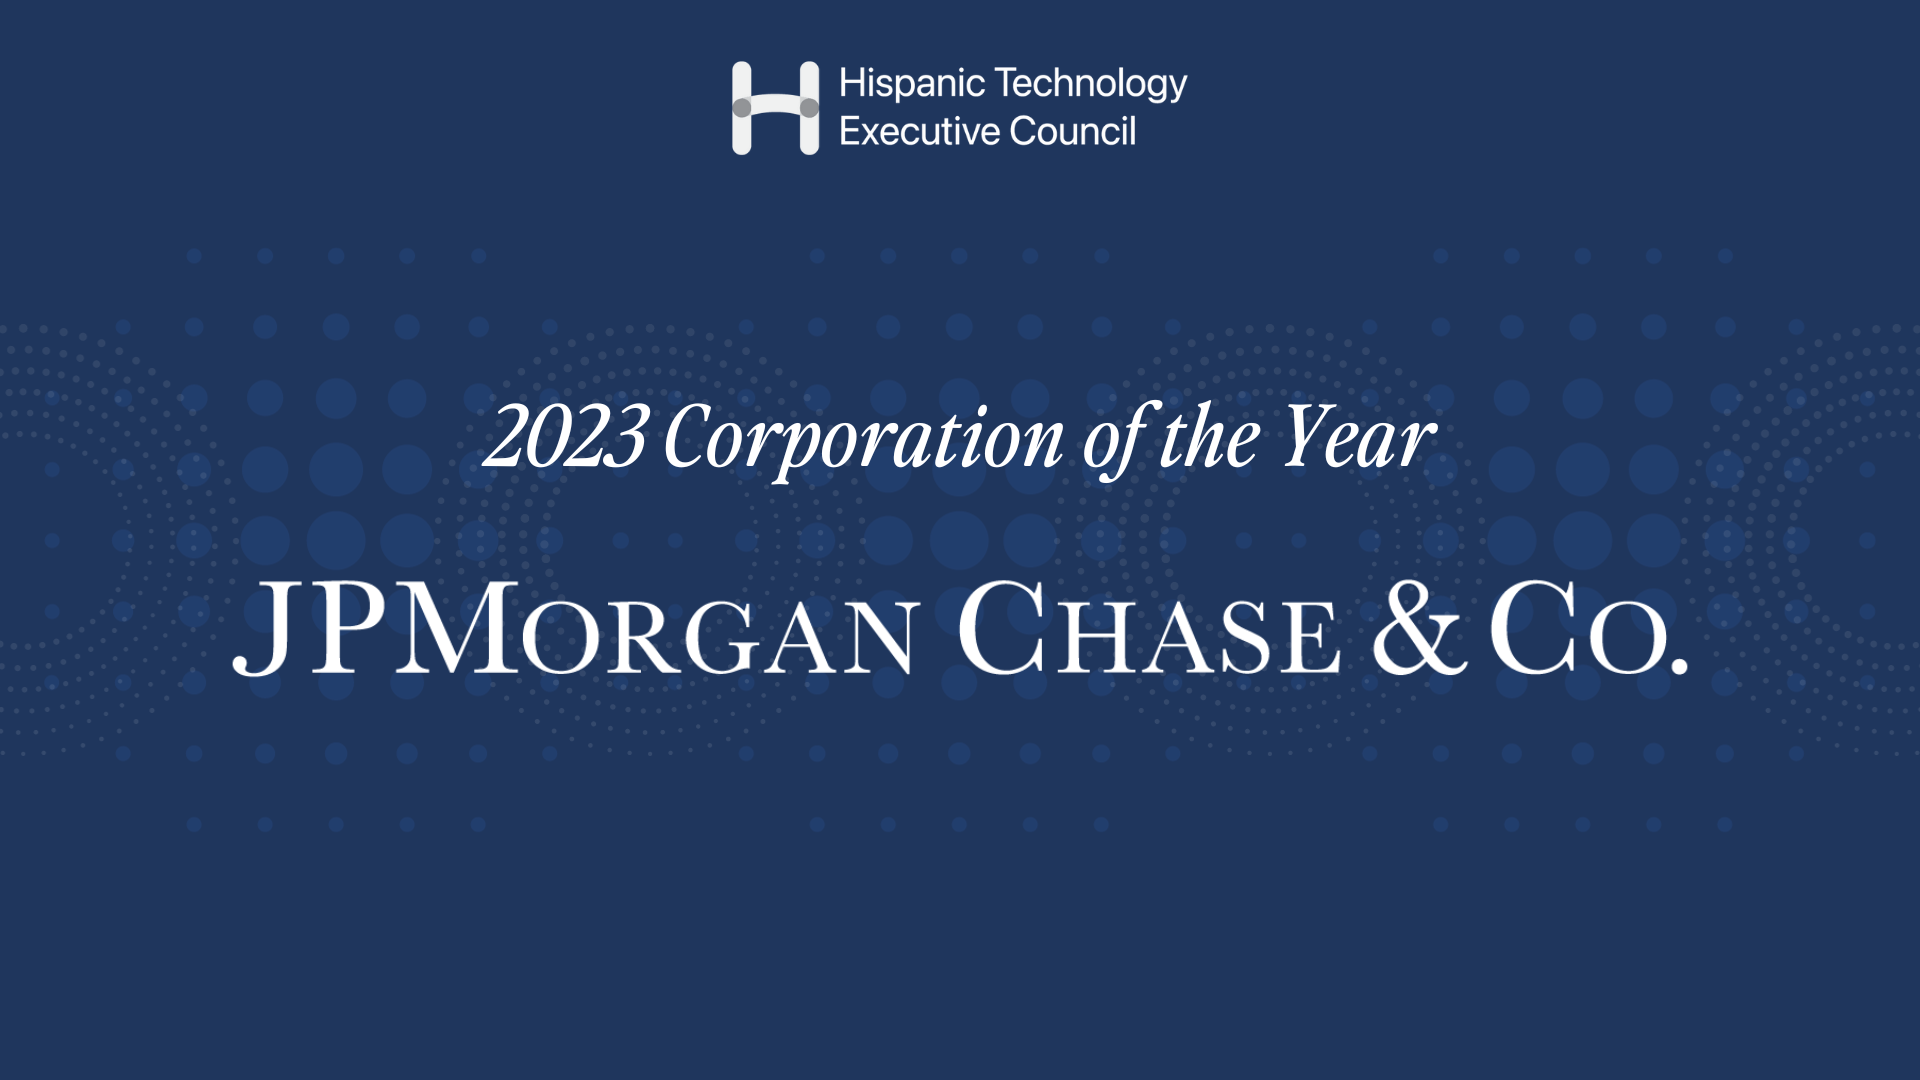 HITEC Recognizes JPMorgan Chase & Co. as Corporation of the Year during the HITEC Awards Gala